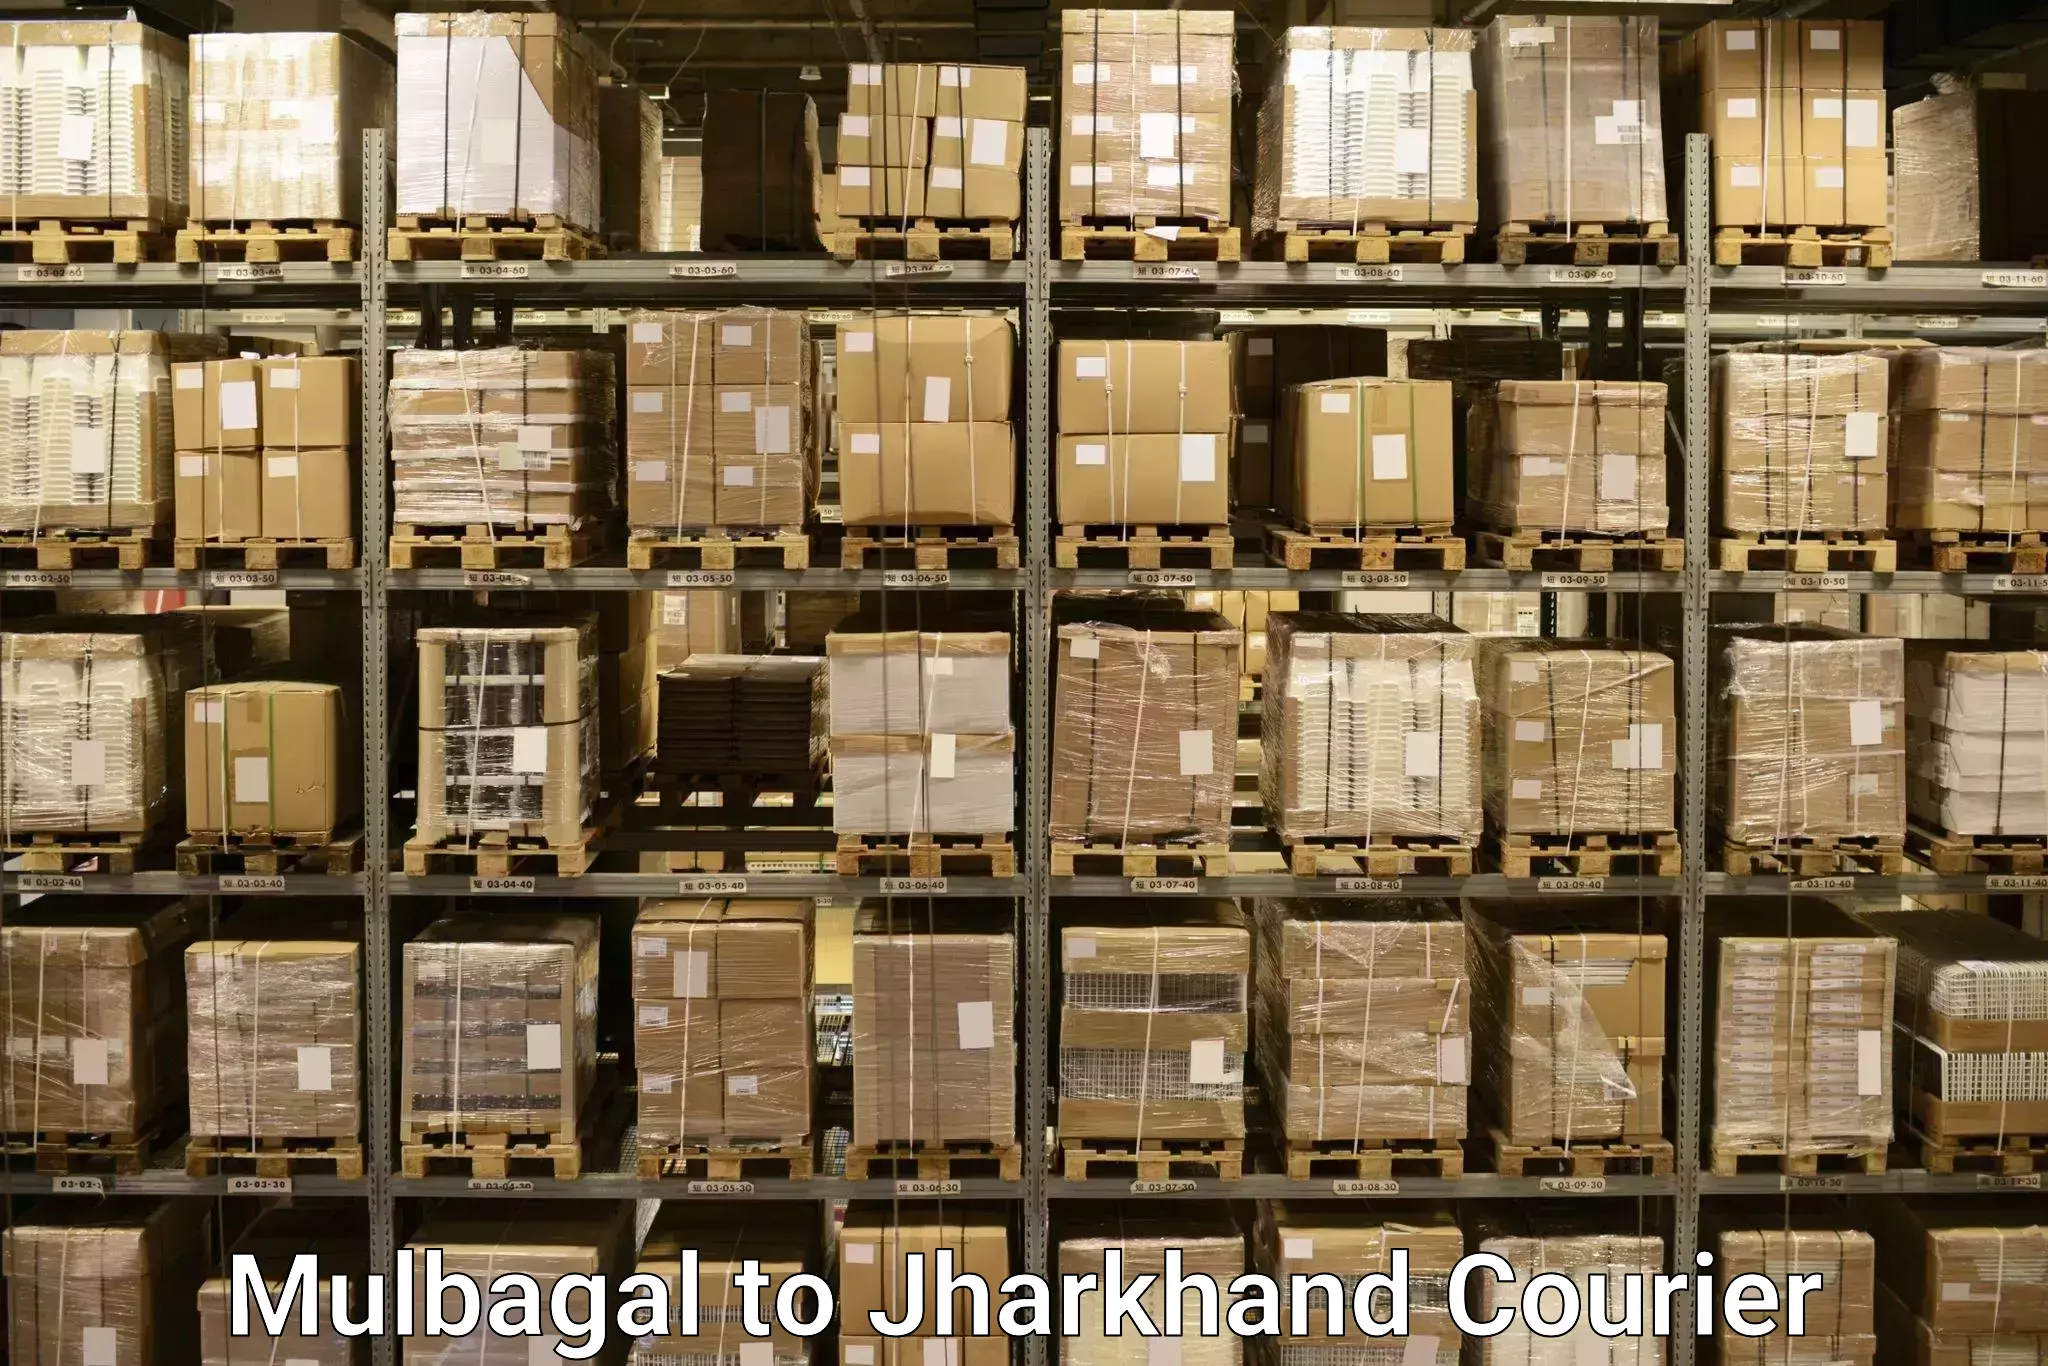 Baggage transport technology Mulbagal to Seraikella